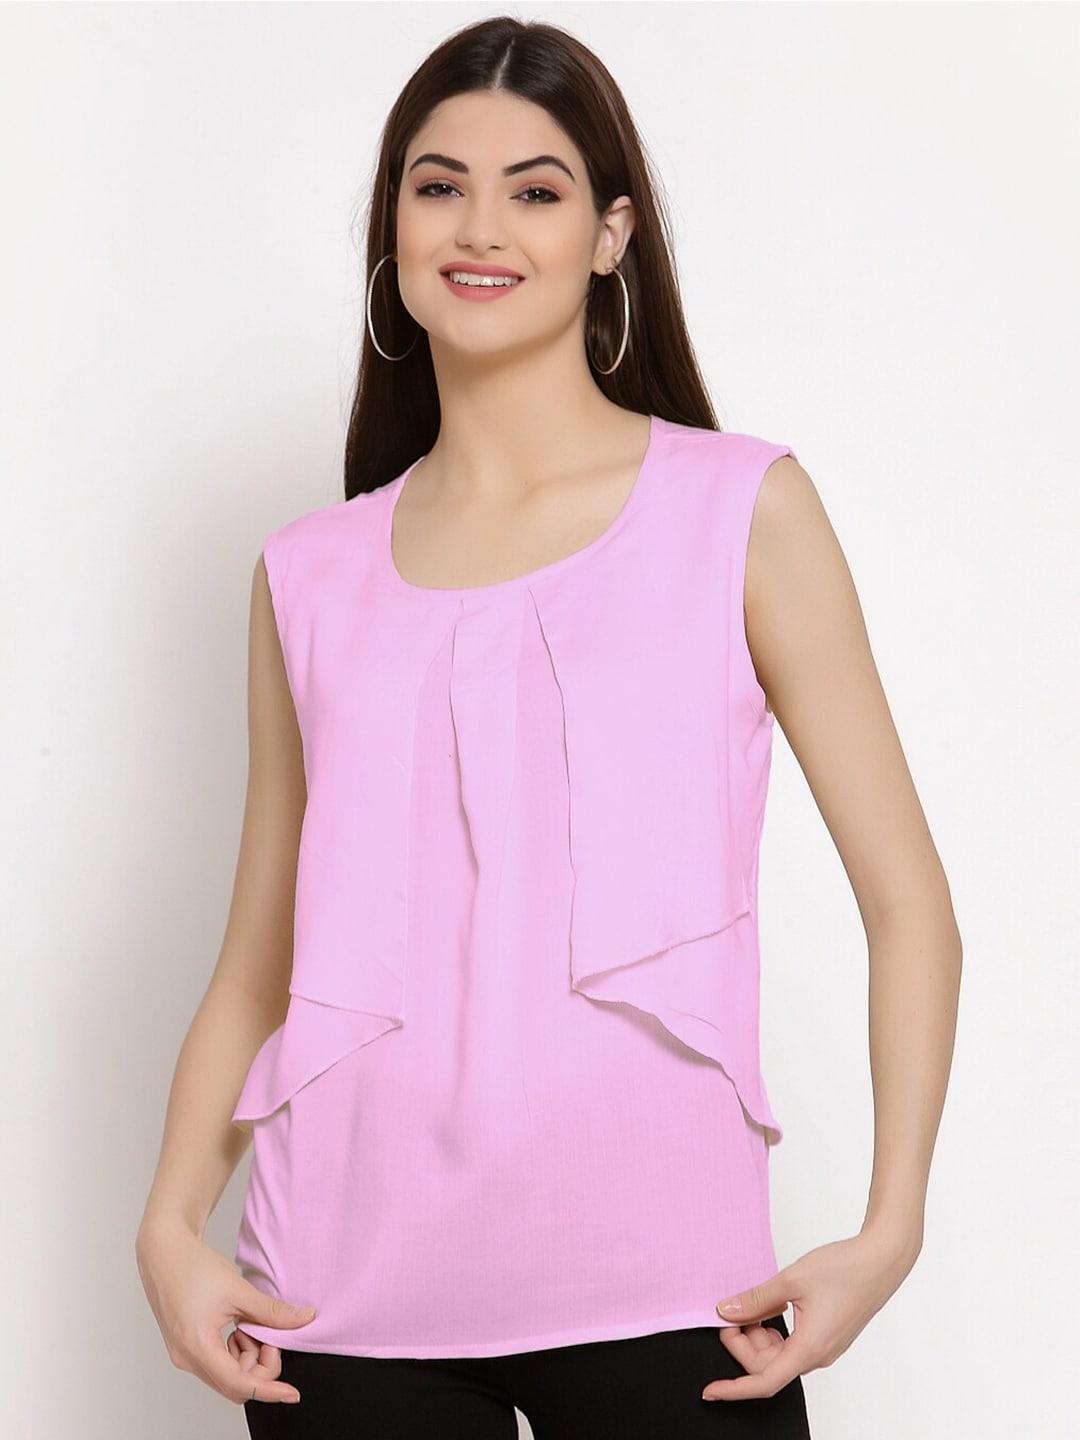 patrorna-women-pink-solid-layered-top